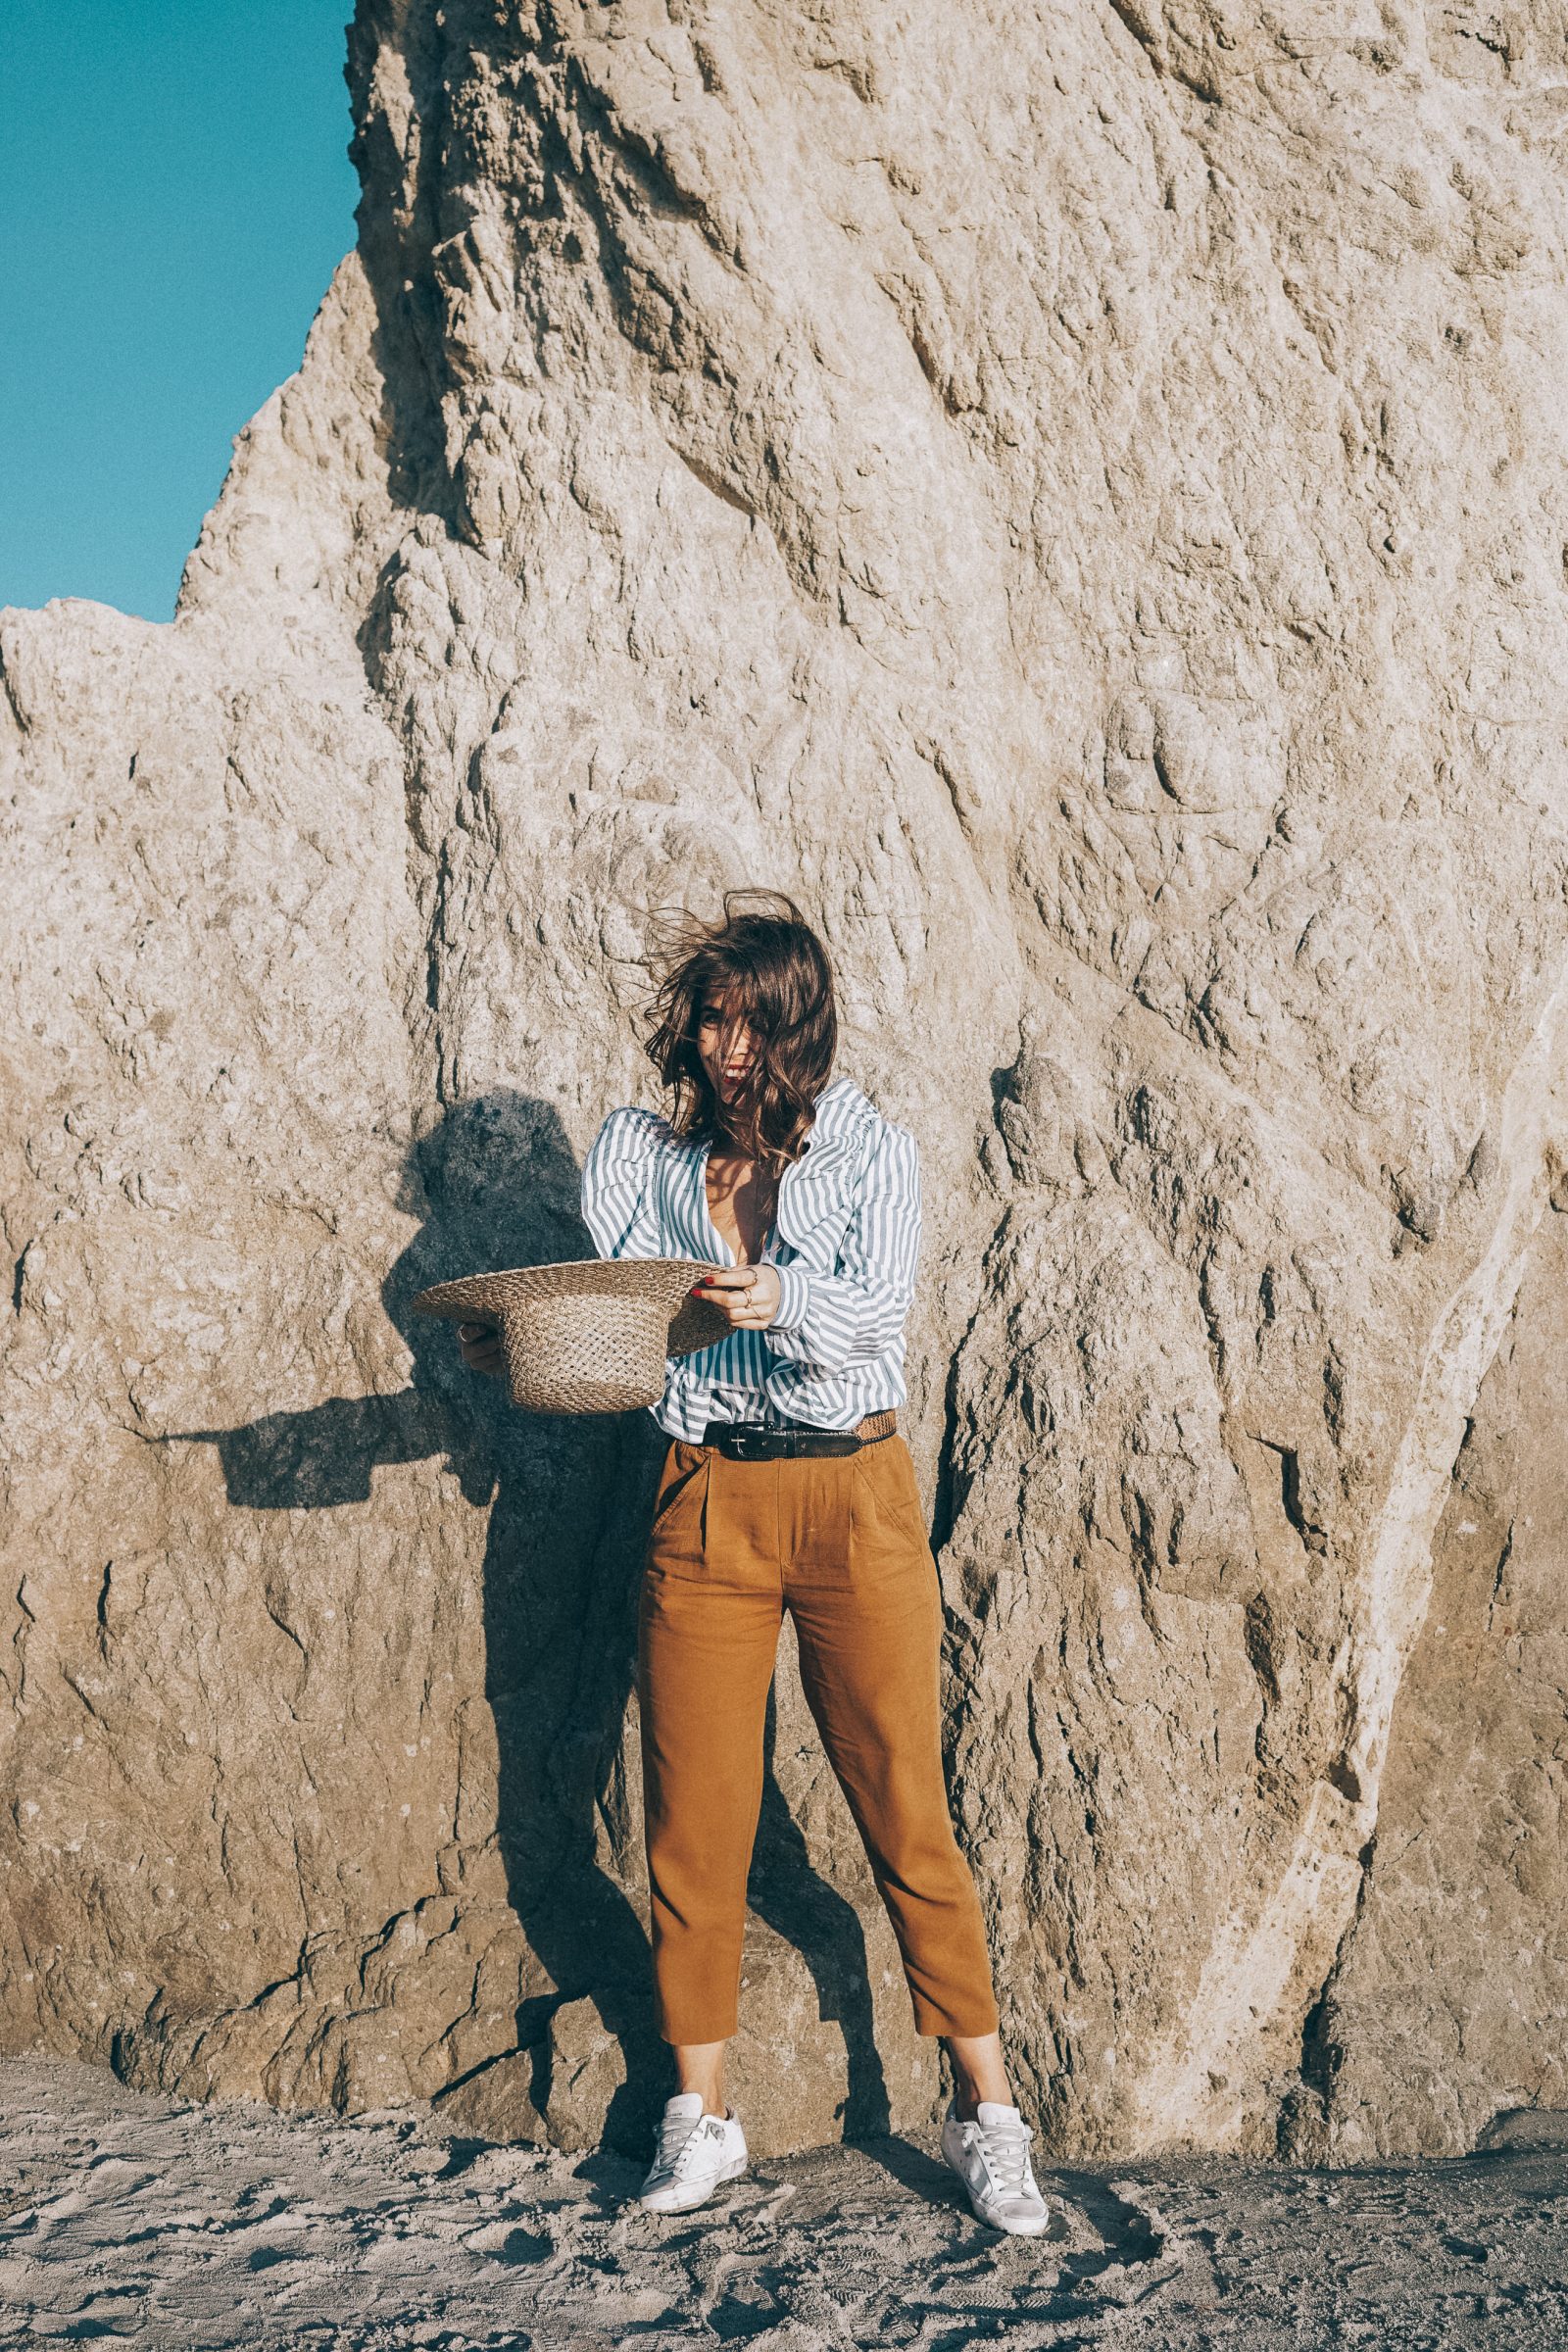 stripped_blouse-camel_trousers-lack_of_color_hat-wanderlust_jewels-matador_beach-malibu-golden_goose_sneakers-street_style-collage_vintage-107